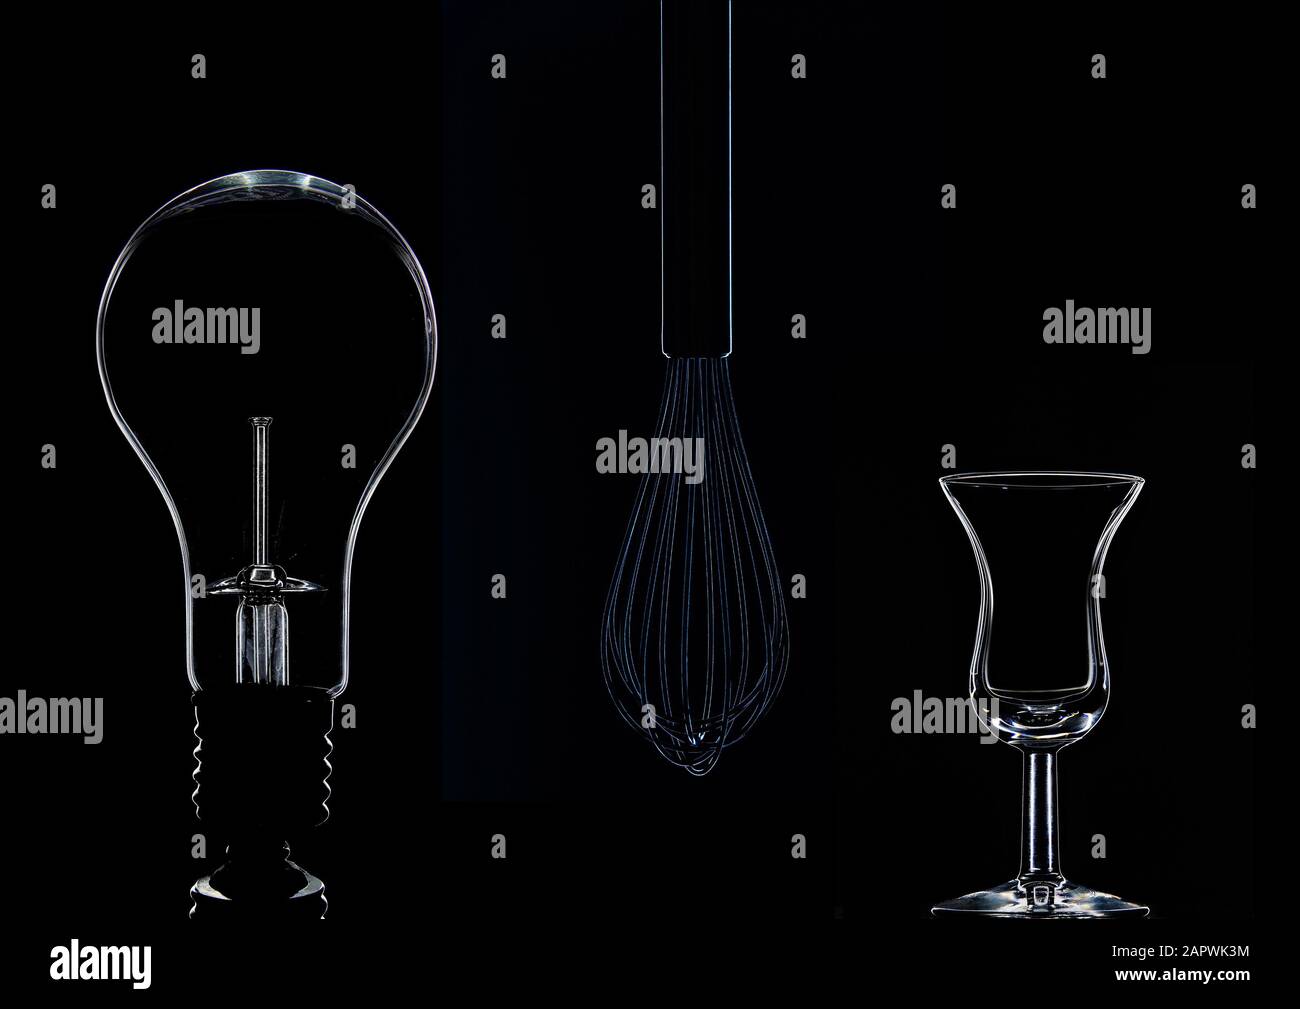 https://c8.alamy.com/comp/2APWK3M/still-life-shot-of-a-light-bulb-a-whisk-and-a-glass-on-a-black-background-2APWK3M.jpg